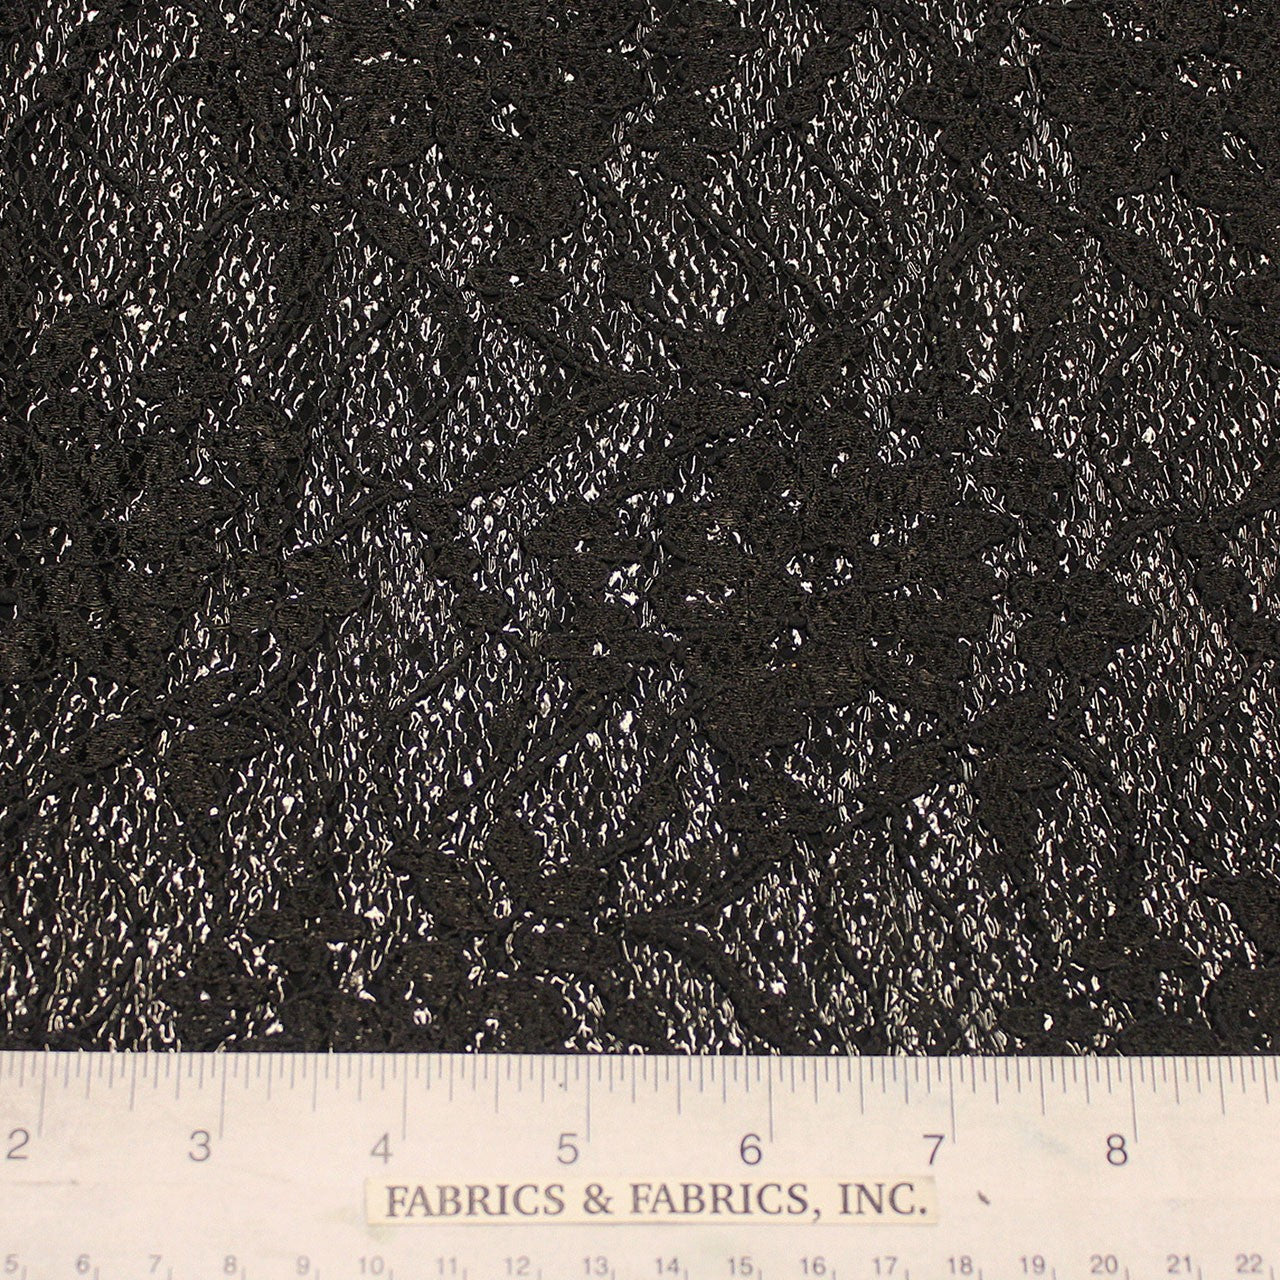 Floral Novelty Lace fabric - Black